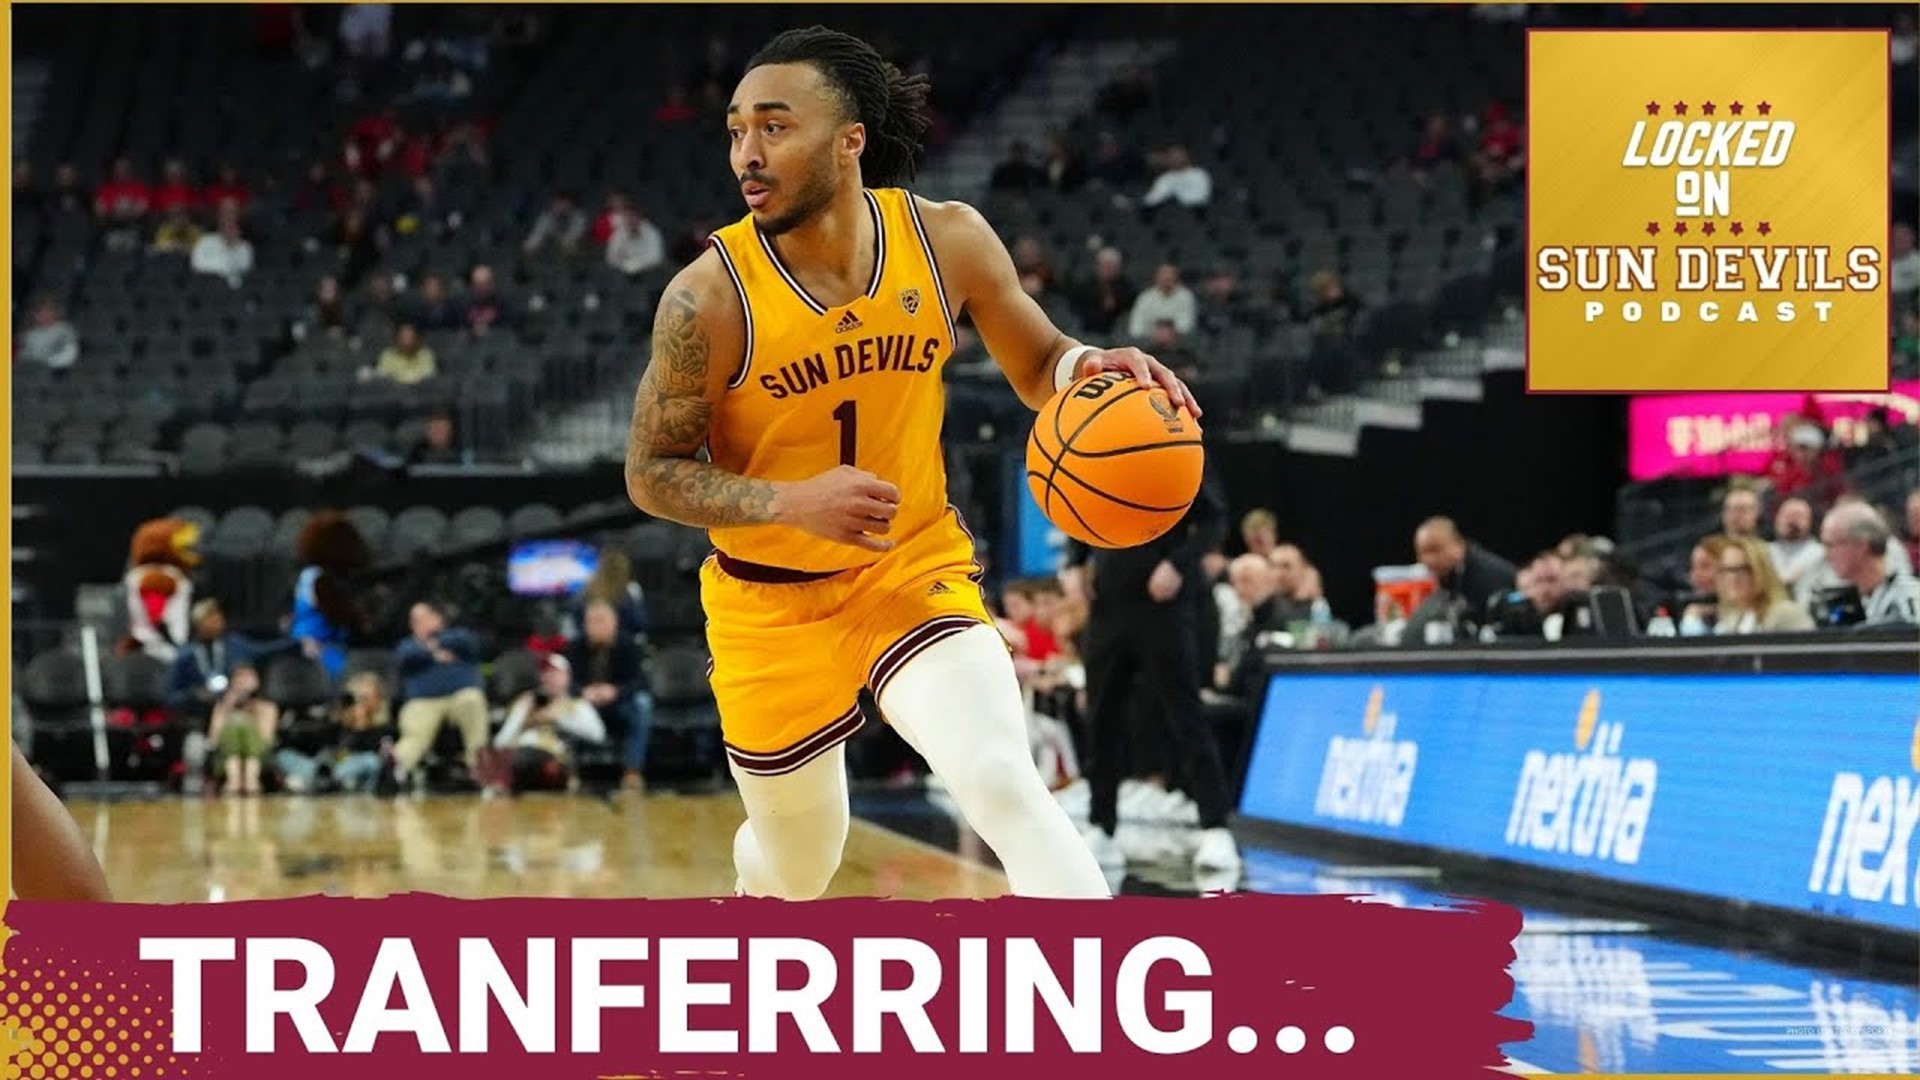 Host Richie Bradshaw breaks down what the Sun Devils will miss with Collins entering the portal, who could step up, and more on this edition of the podcast.